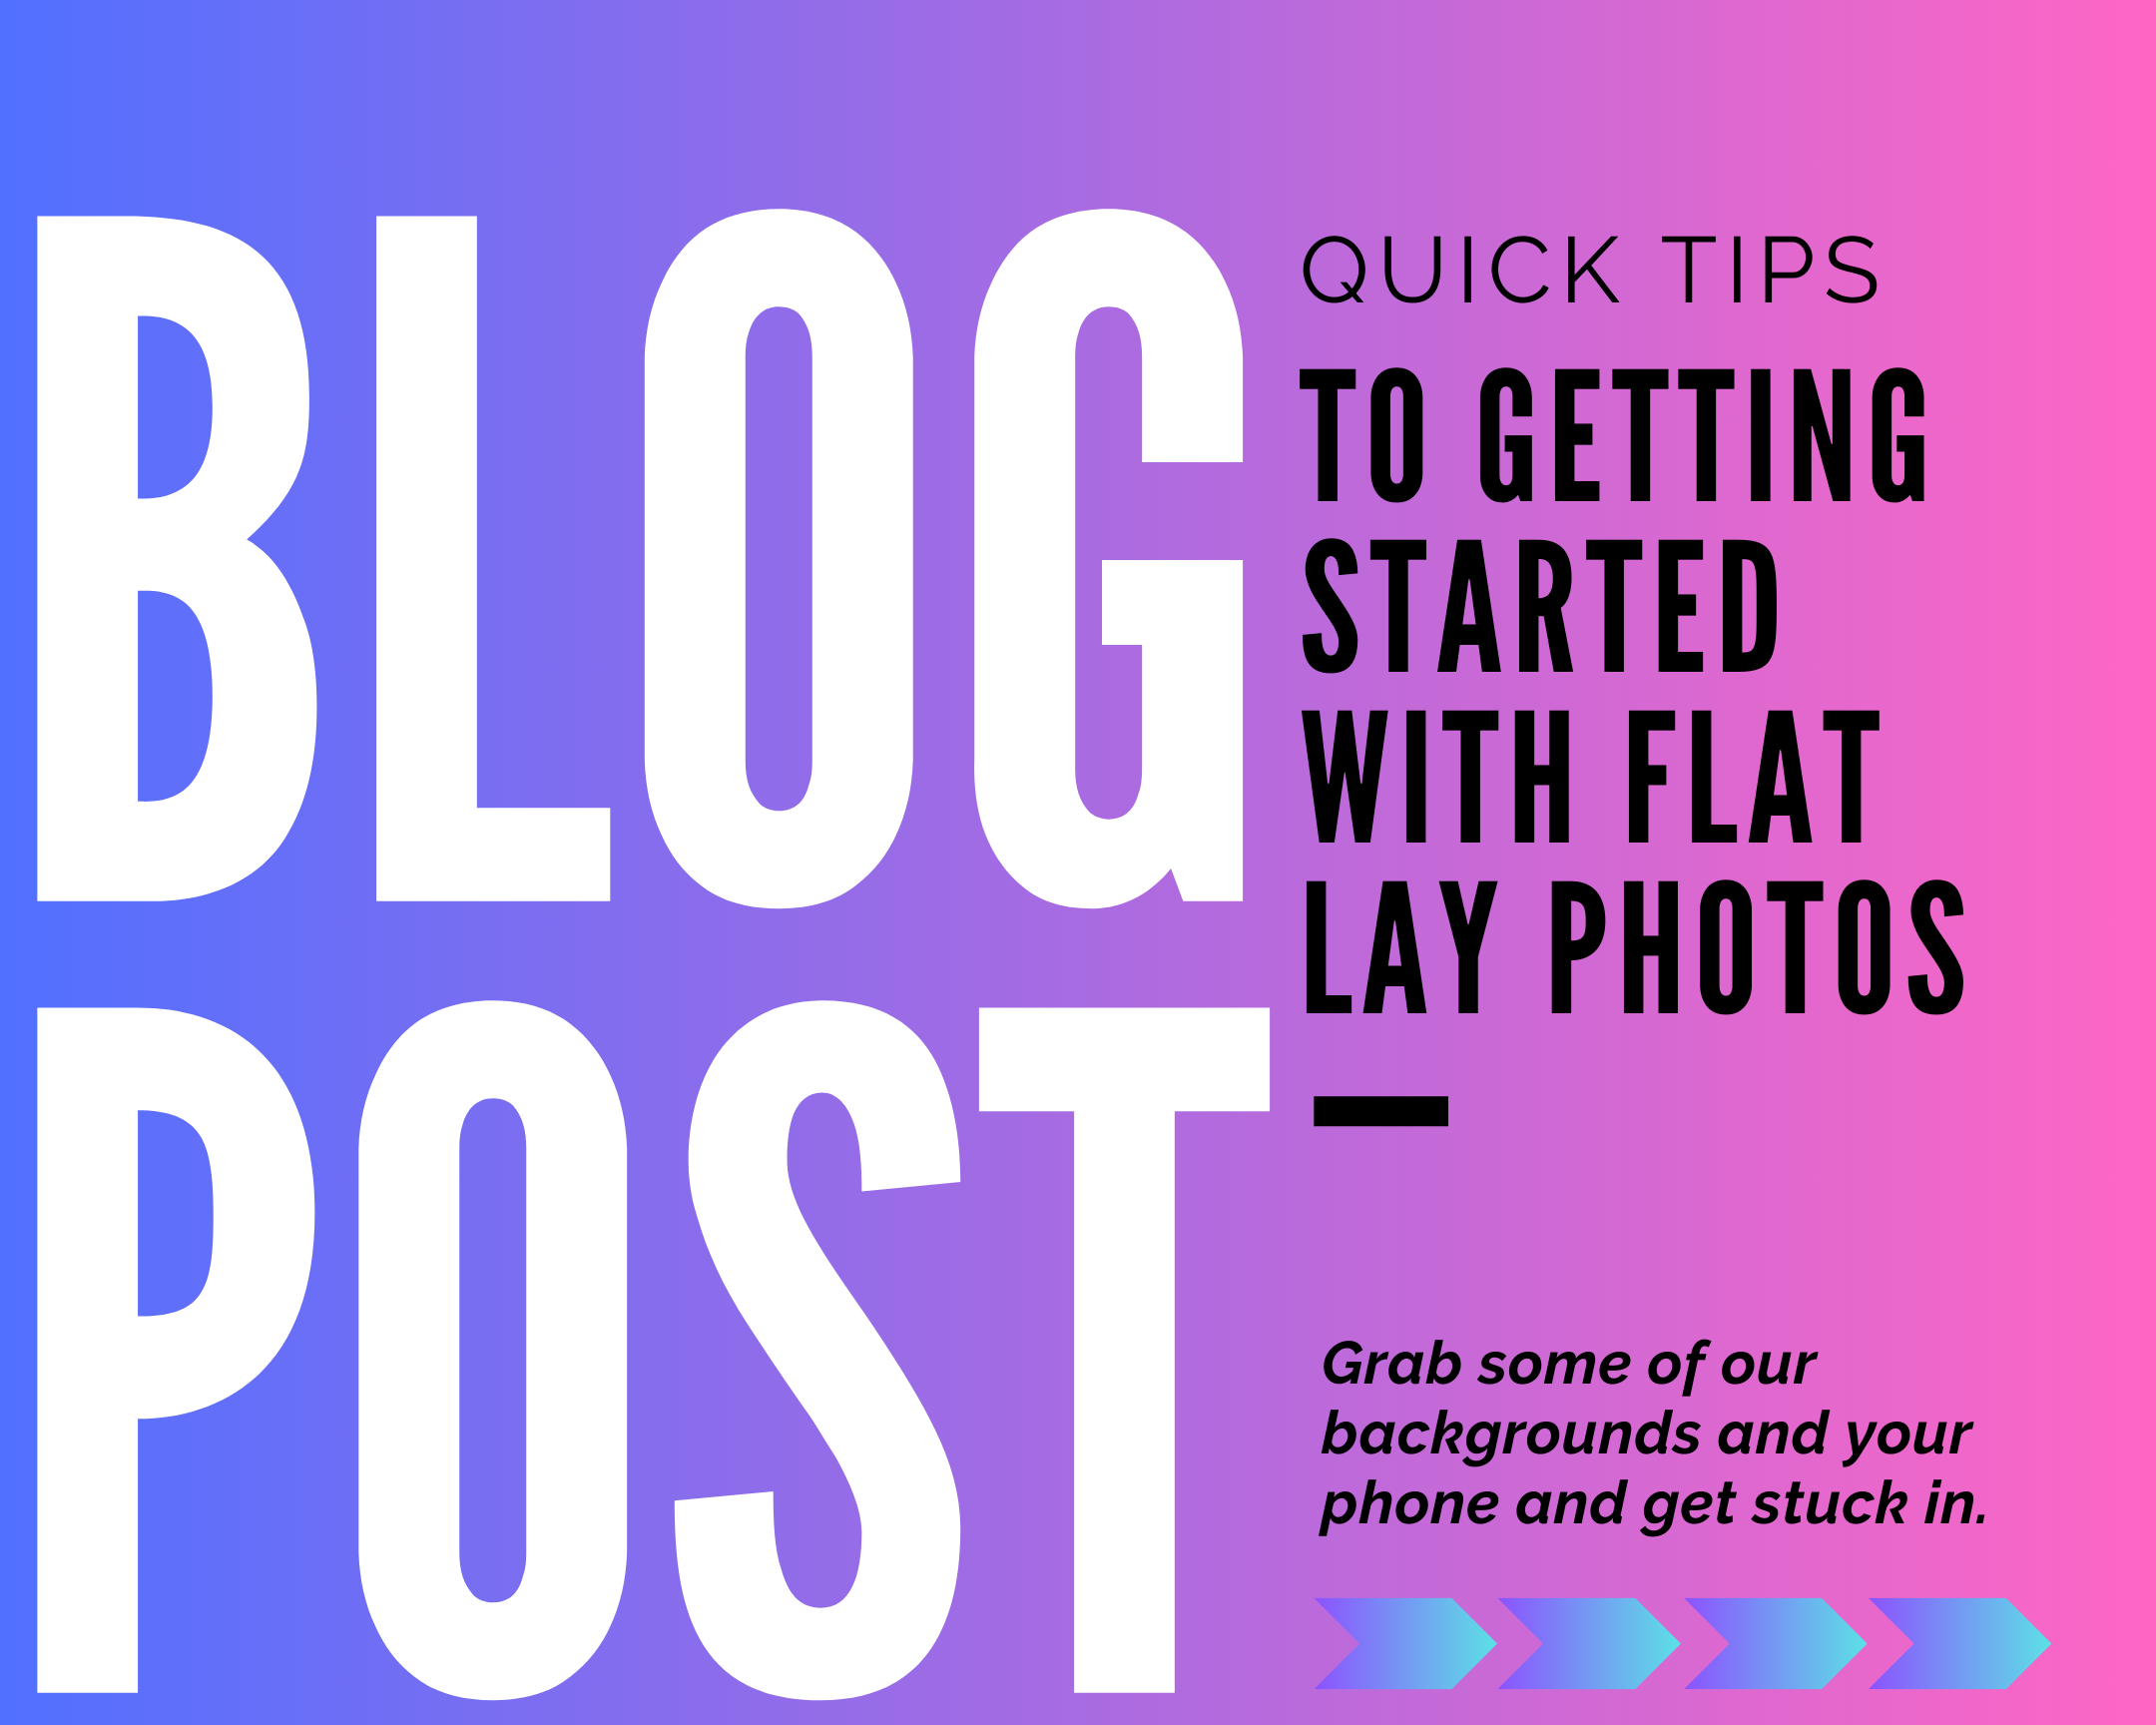 8 Quick tips for Getting Started with flat lay photography